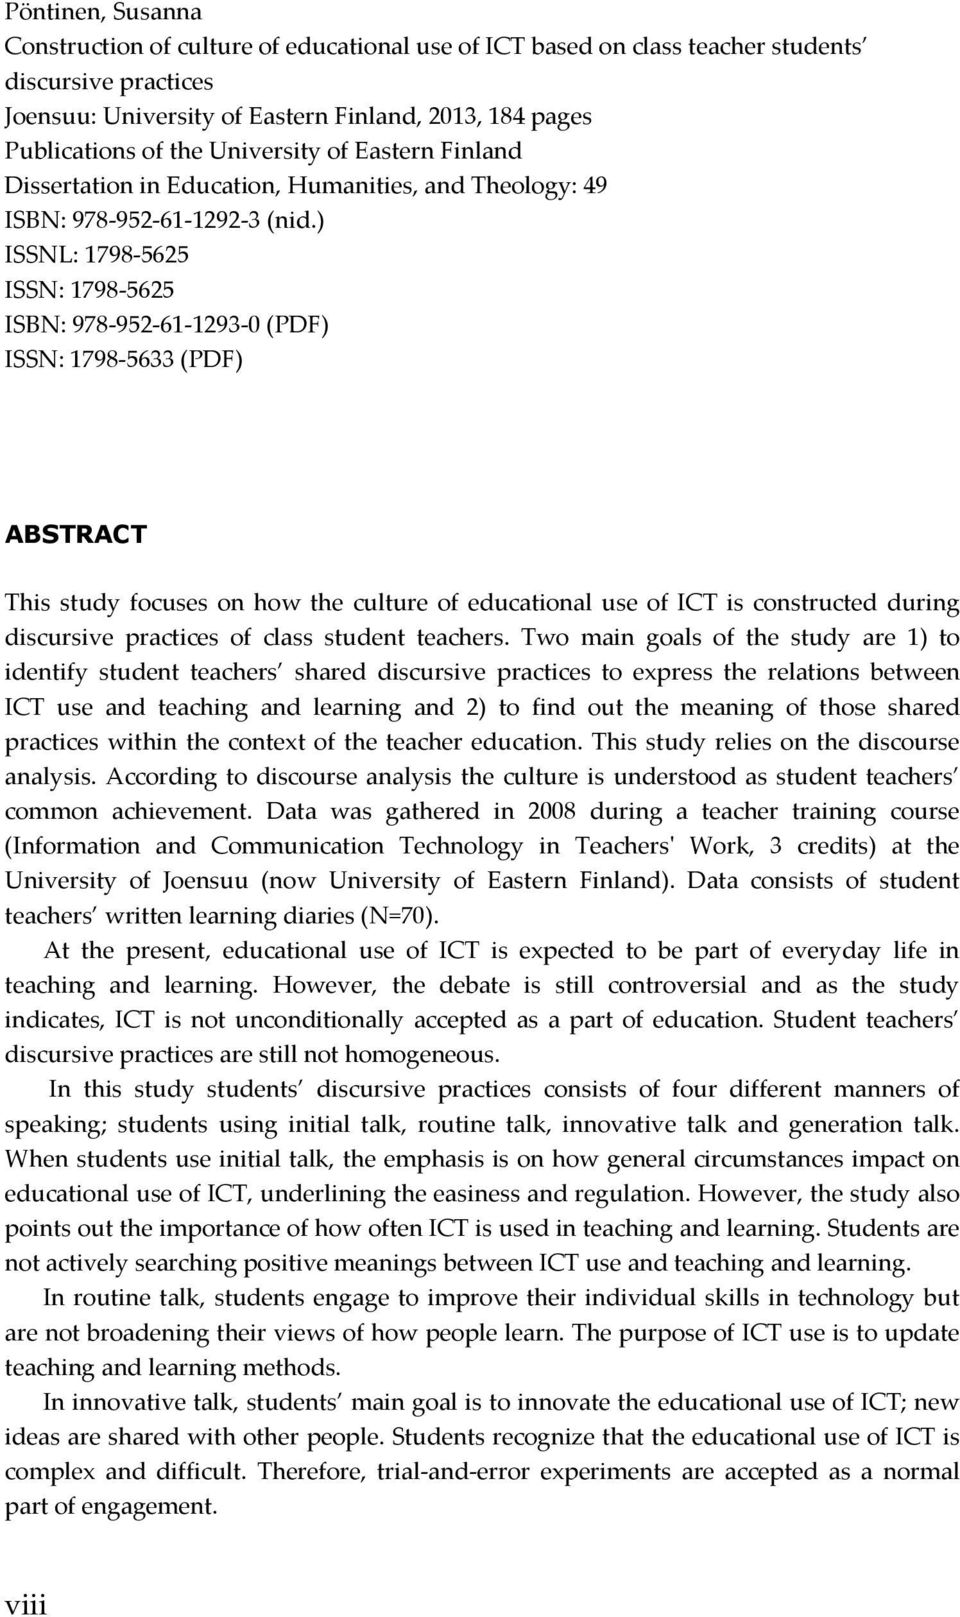 ) ISSNL: 1798-5625 ISSN: 1798-5625 ISBN: 978-952-61-1293-0 (PDF) ISSN: 1798-5633 (PDF) ABSTRACT This study focuses on how the culture of educational use of ICT is constructed during discursive